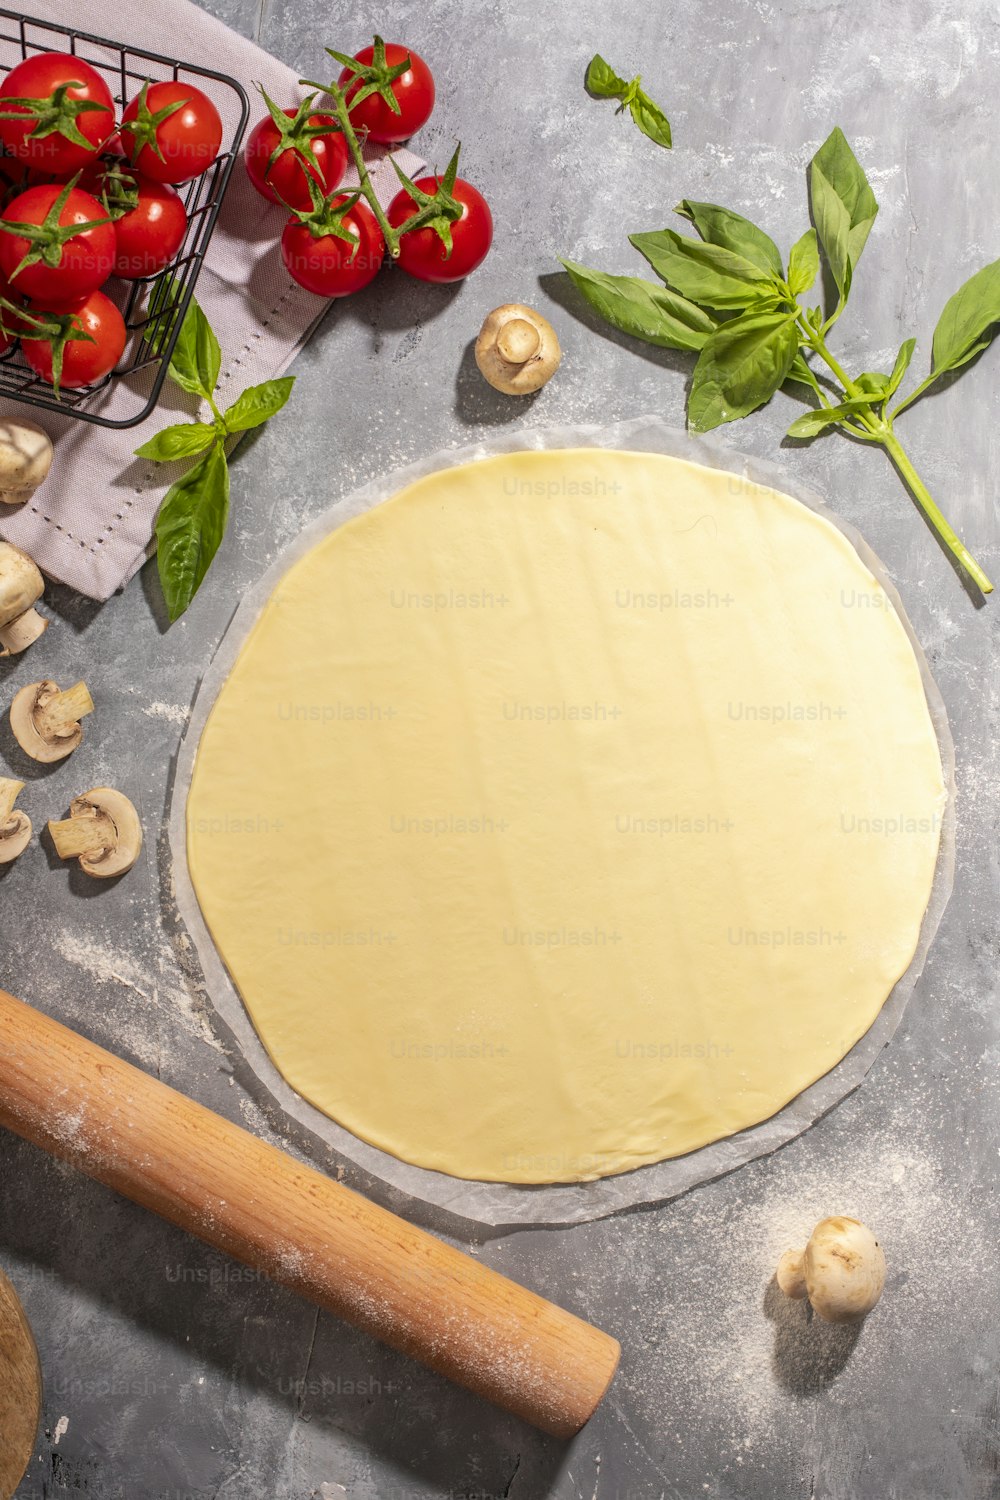 a pizza dough on a table with tomatoes, mushrooms, and a rolling pin